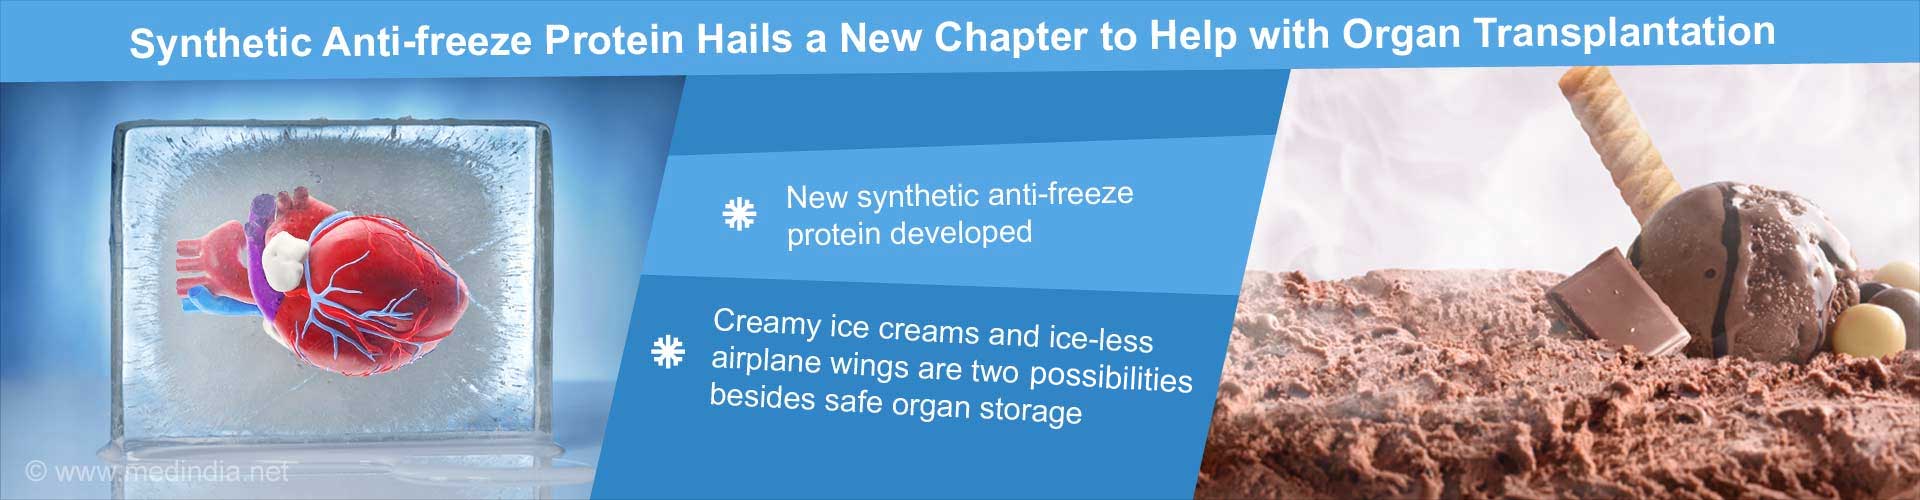 Synthetic Anti-freeze Protein Hails a New Chapter to Help with Organ Transplantation
- new synthetic anti0freeze protein developed
- creamy ice-cream and ice-less airplane wings are two possibilities, besides safe organ storage